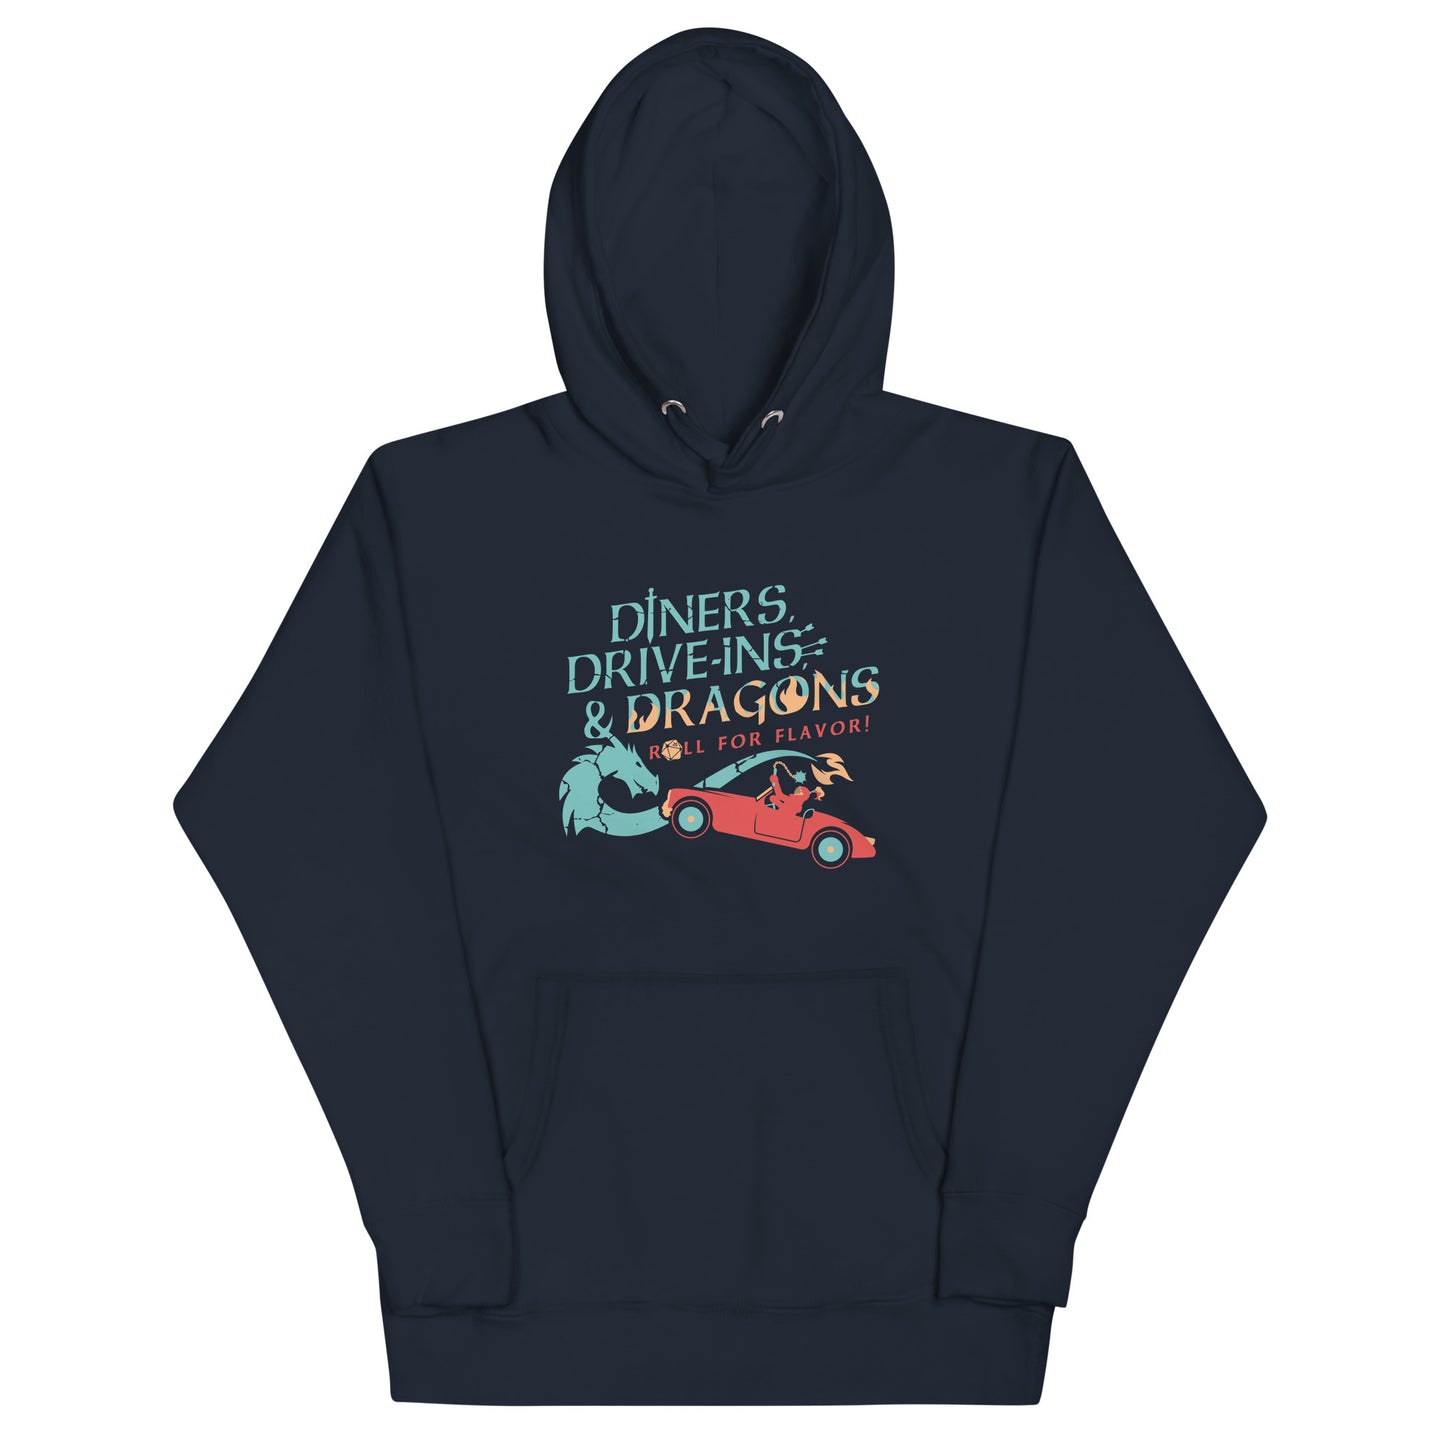 Diners, Drive-ins, & Dragons Unisex Hoodie